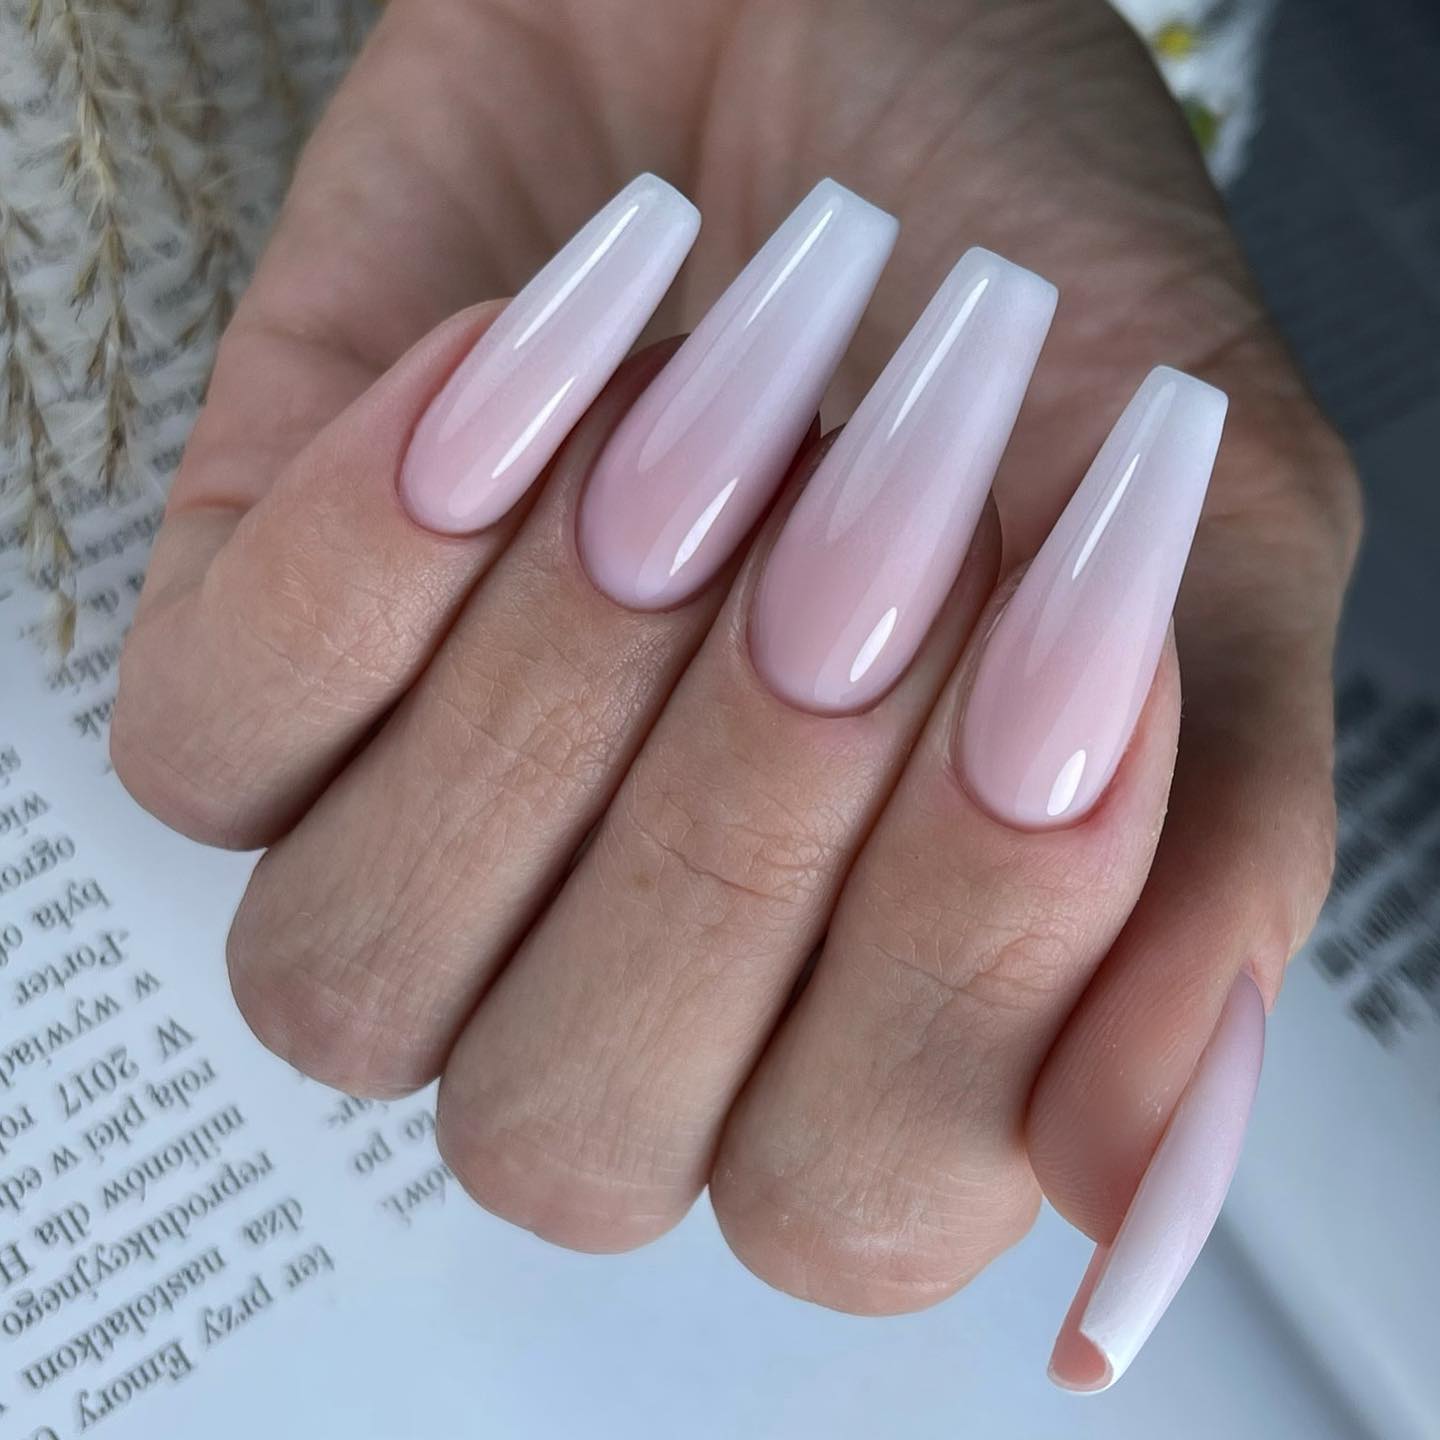 This color combination rocks with ballerina nails! It's so feminine and pretty. The pink really pops, and the white is such a classic shade to wear.